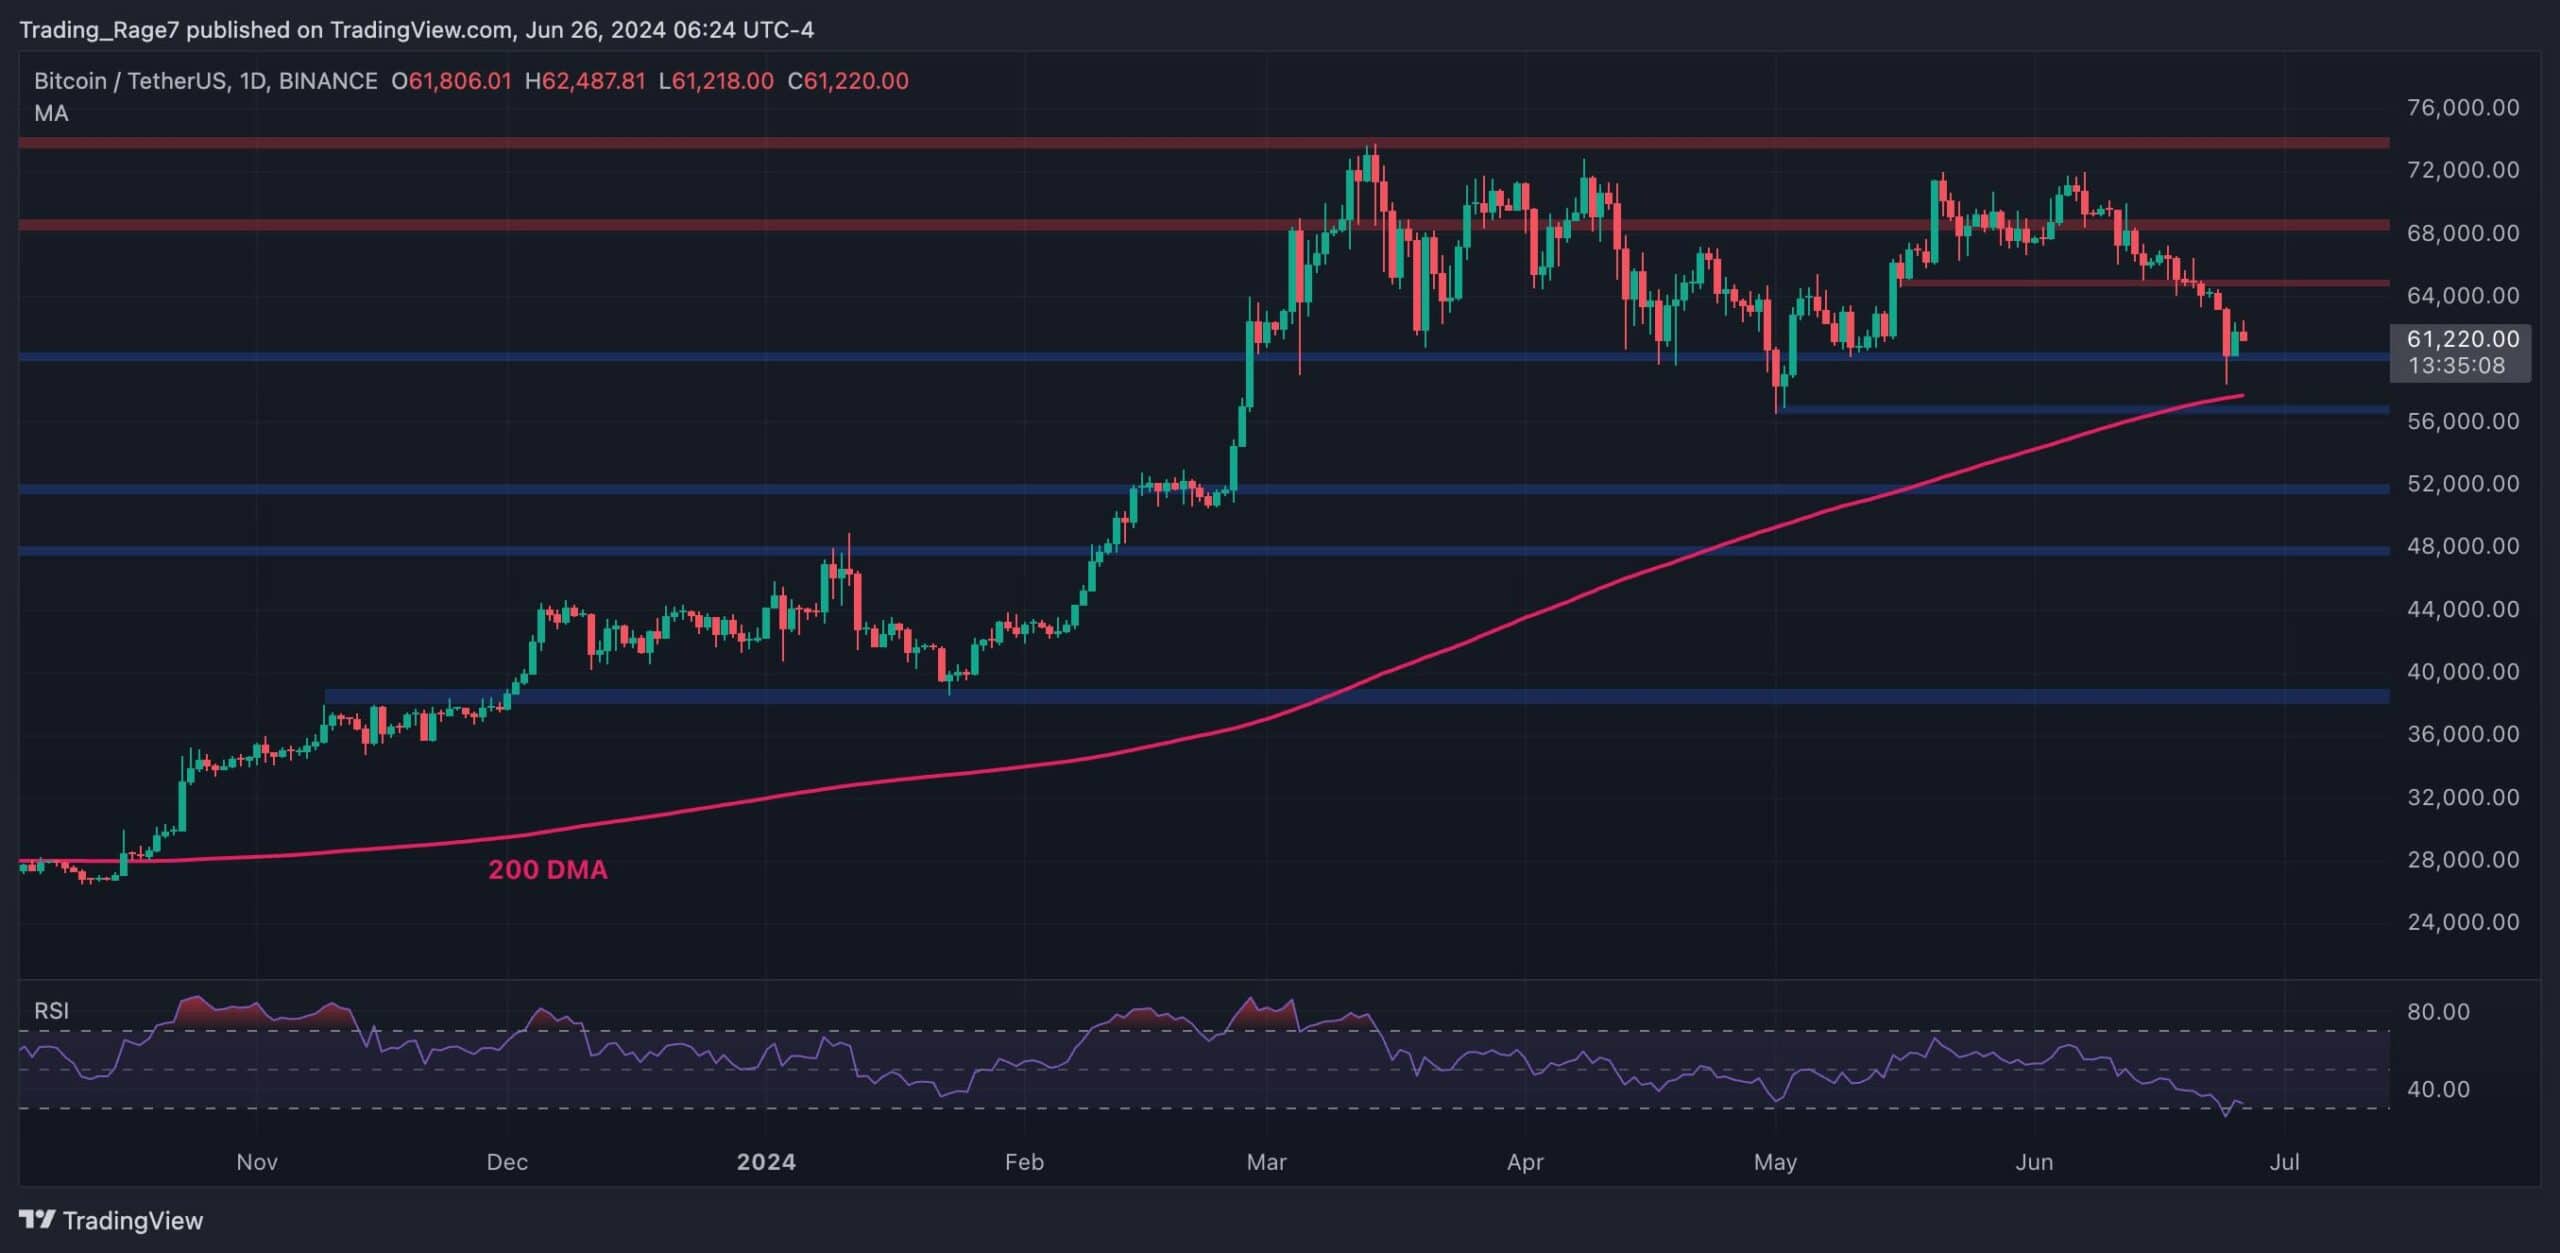 BTC Recovers Above $61K But Danger Still Looms if it Breaks Below This Key Support Level: Bitcoin Price Analysis